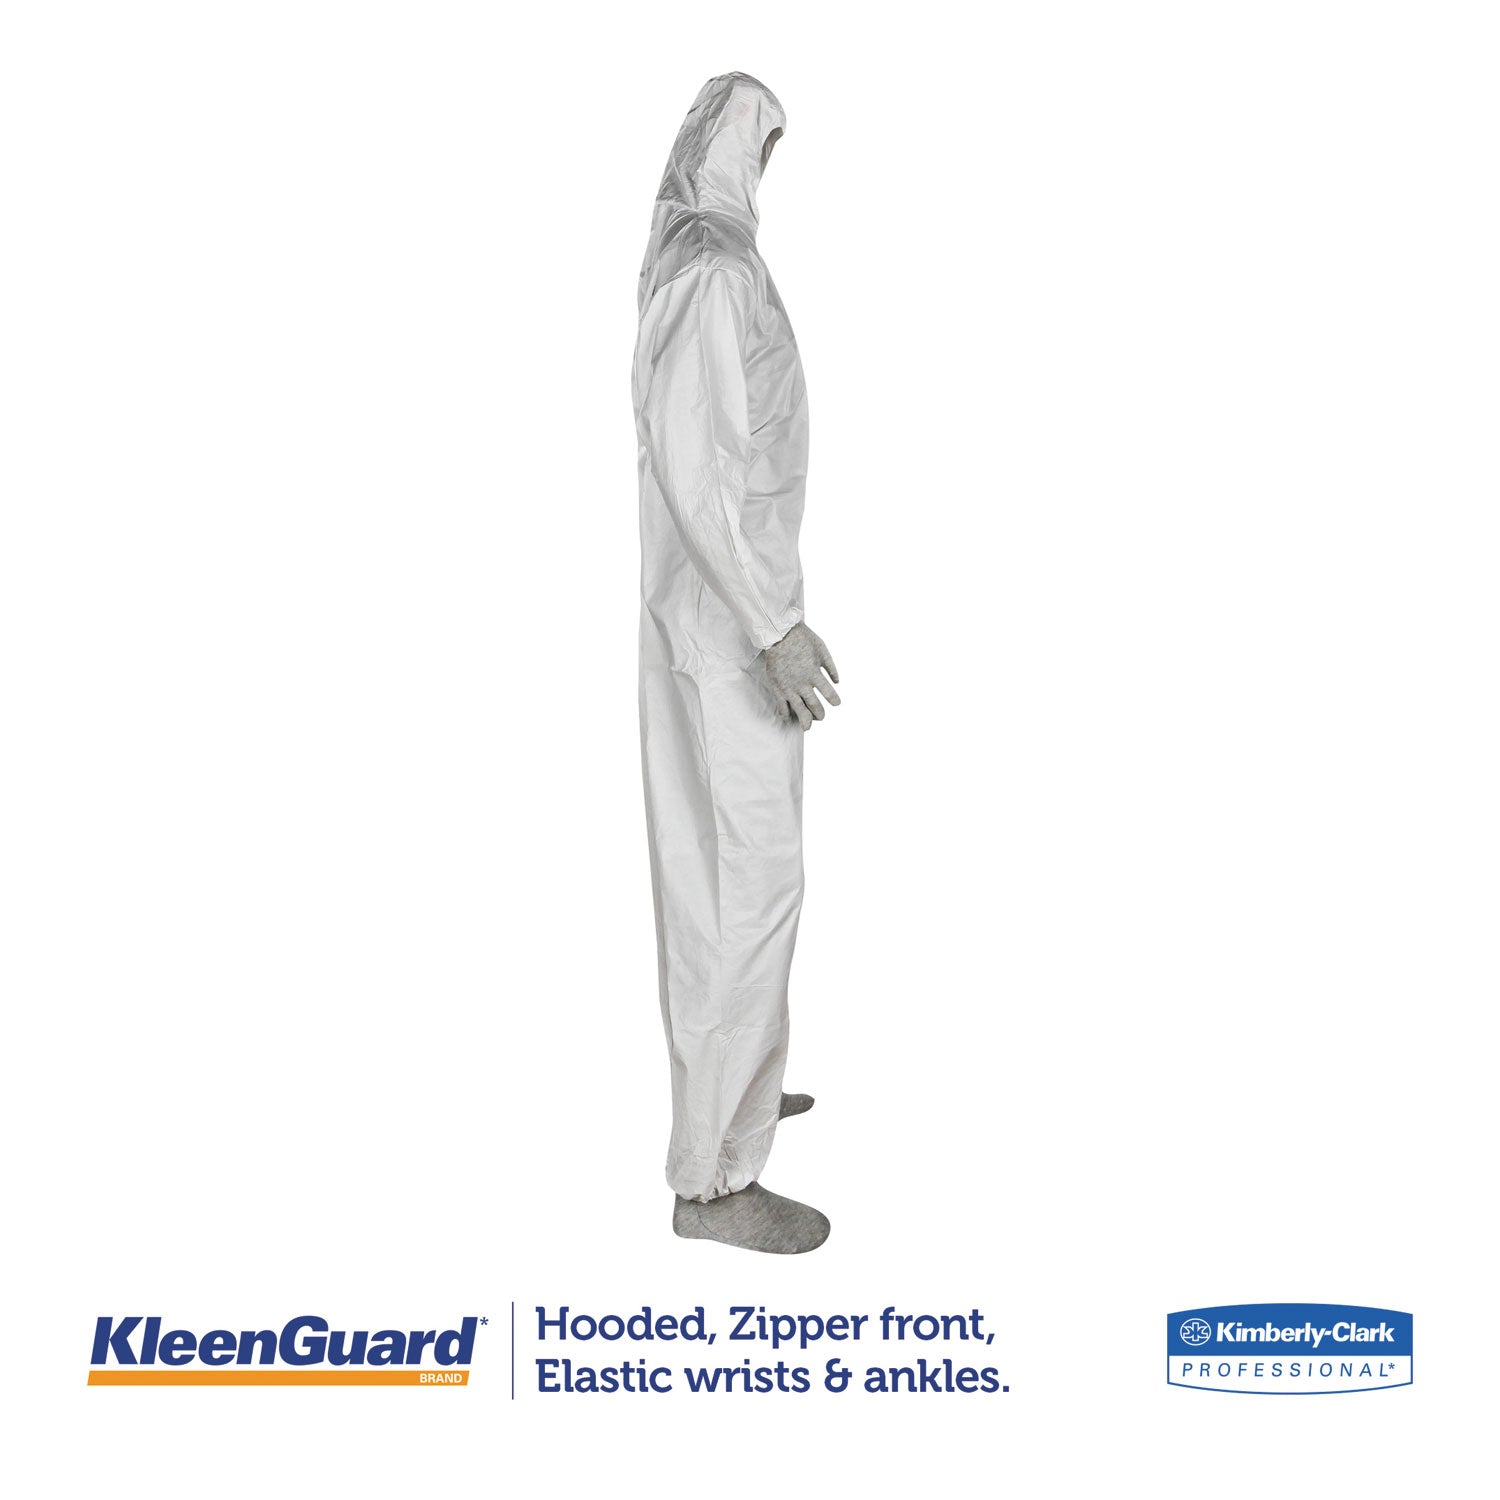 a35-liquid-and-particle-protection-coveralls-zipper-front-hooded-elastic-wrists-and-ankles-large-white-25-carton_kcc38938 - 3